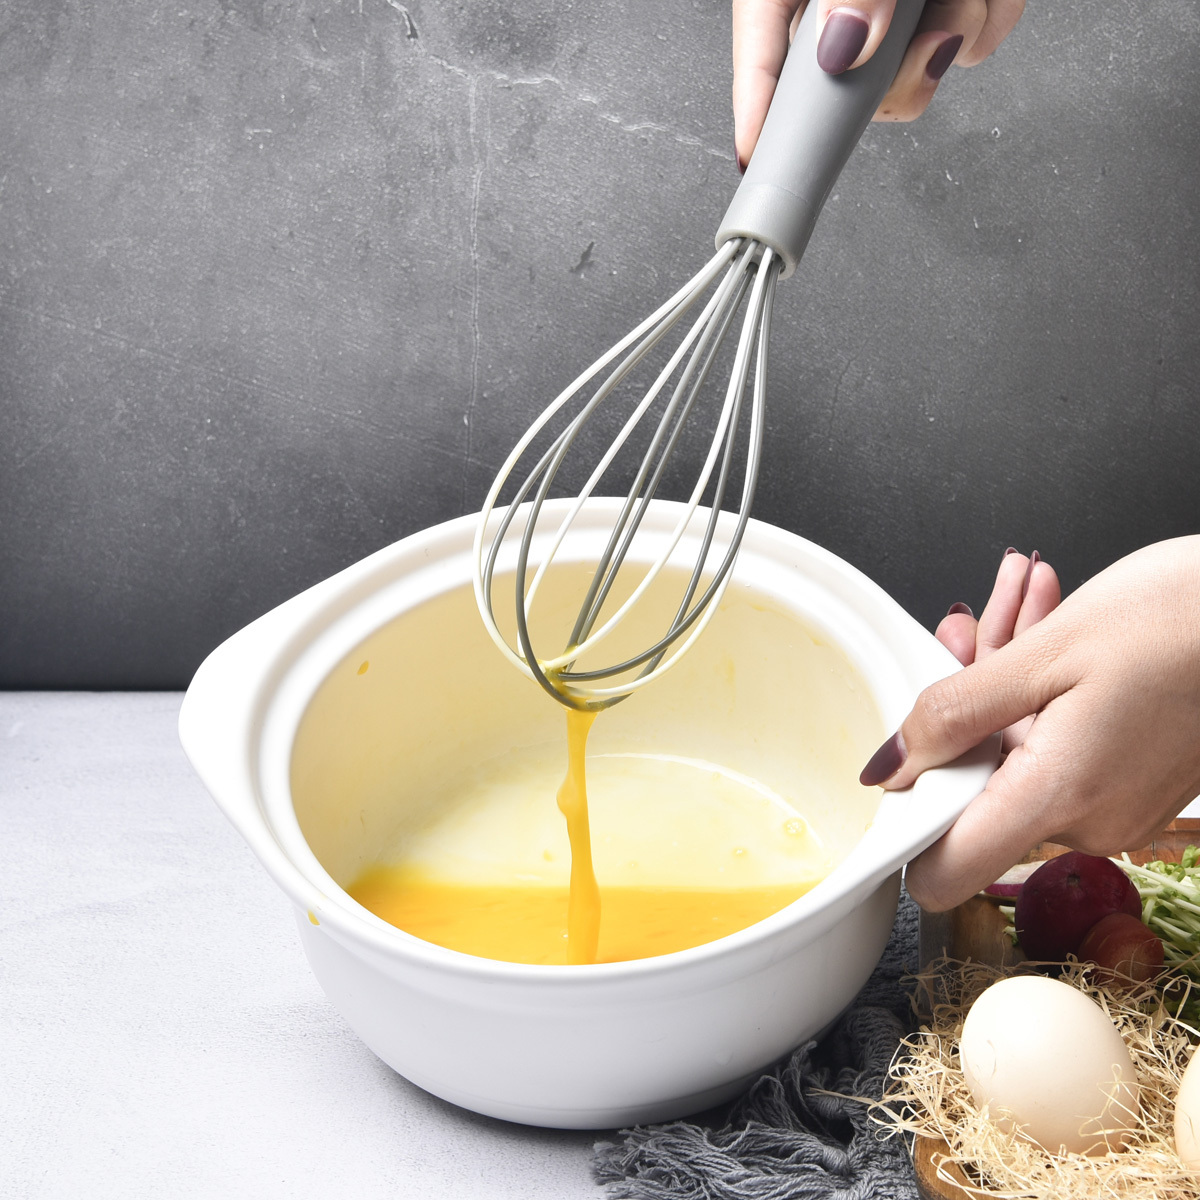 NiftyPlaza 8 inch Egg Beater Whisks Colored Silicone Mini Whisk Baking Blending Cooking Whisking Beating Stirring - Blue